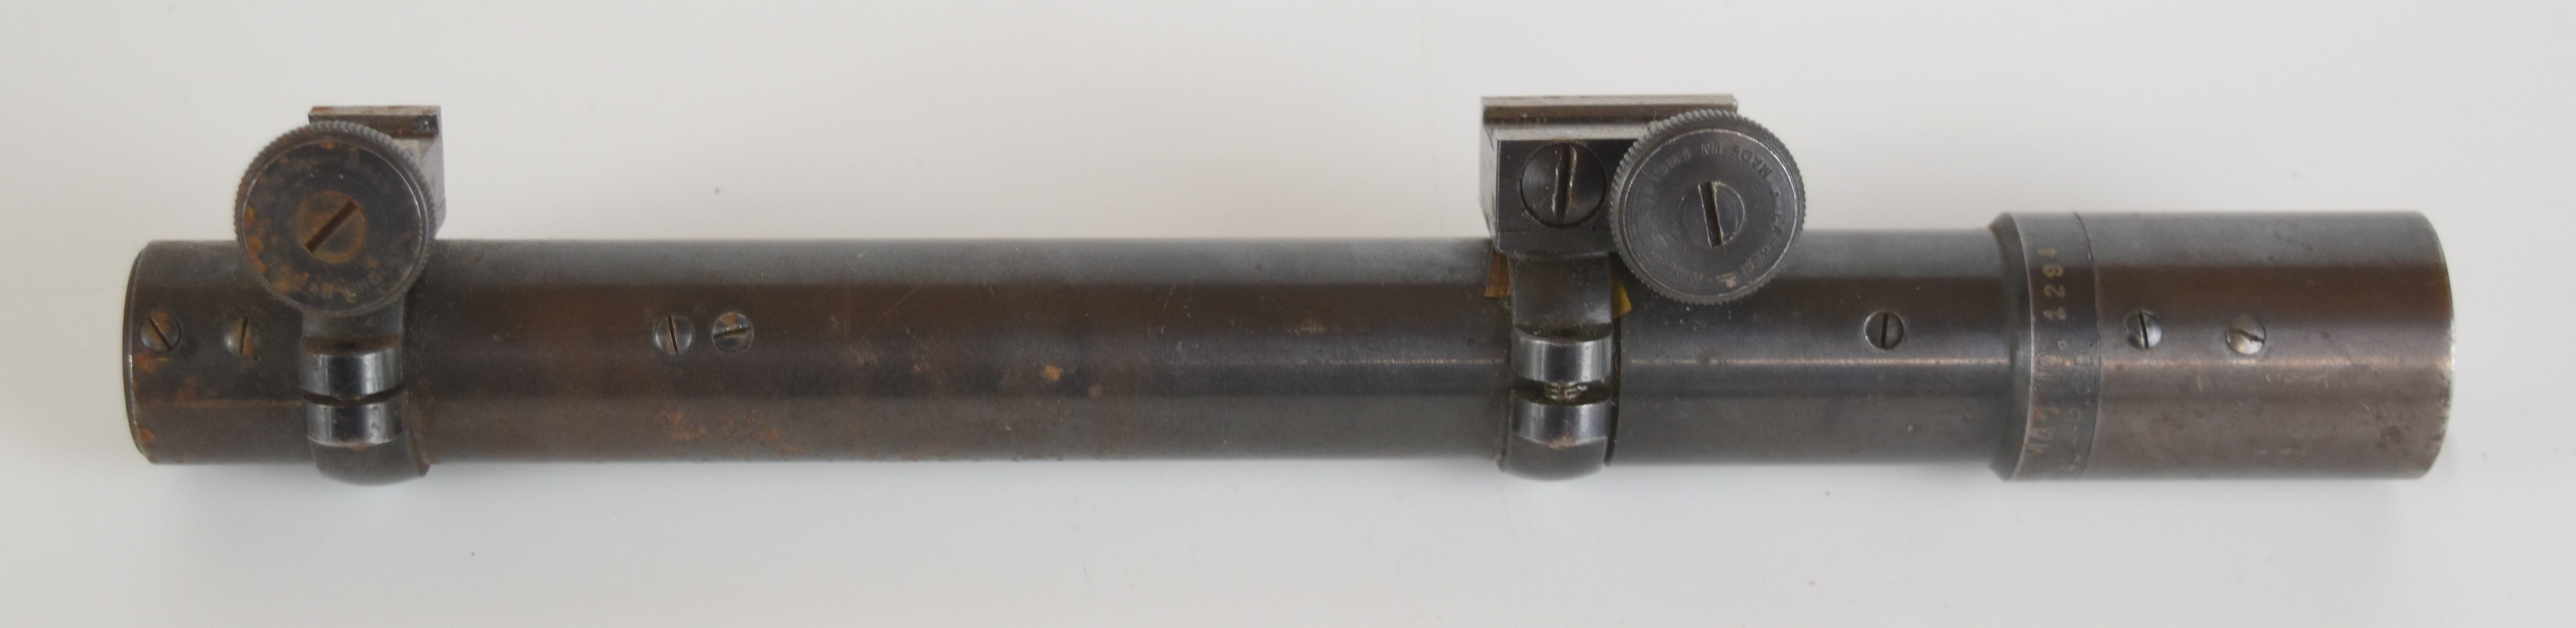 WW2 MHR Co M45 sniper rifle scope marked 'Telescope M45 No 1294 M.H.R. Co 1943 - RJD' with Parker-